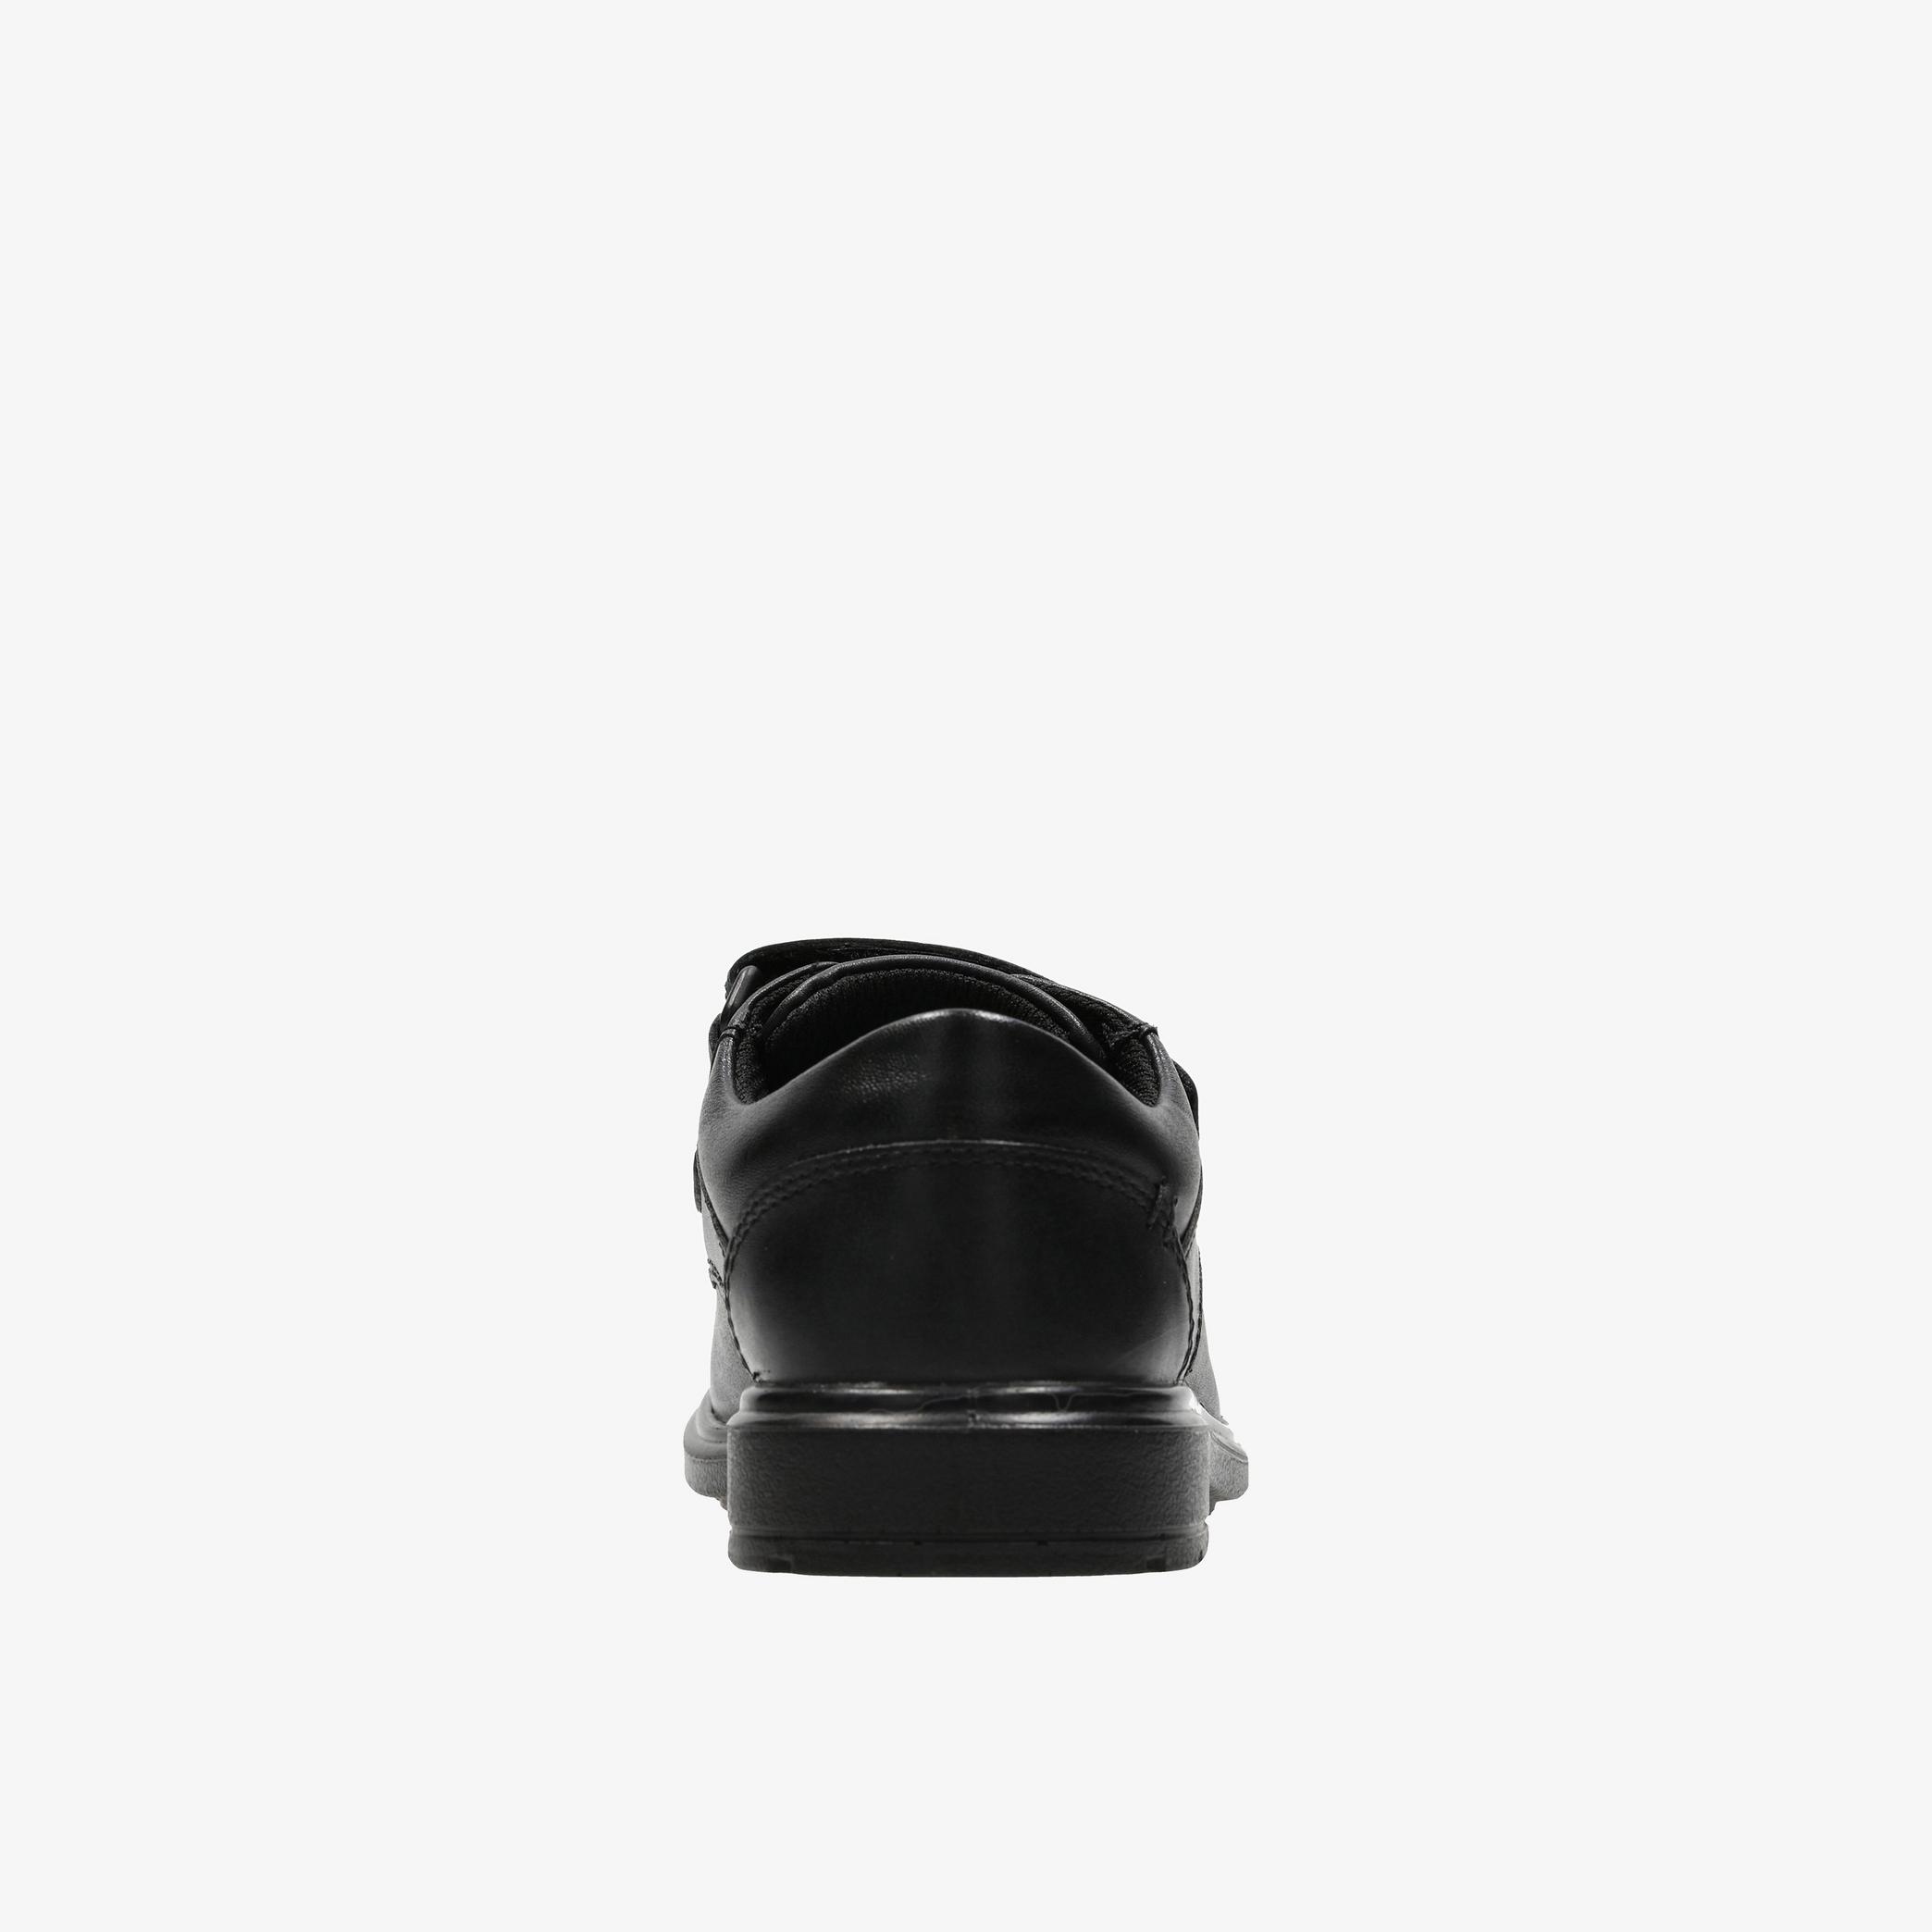 Remi Pace Kid Black Leather Shoes, view 5 of 6